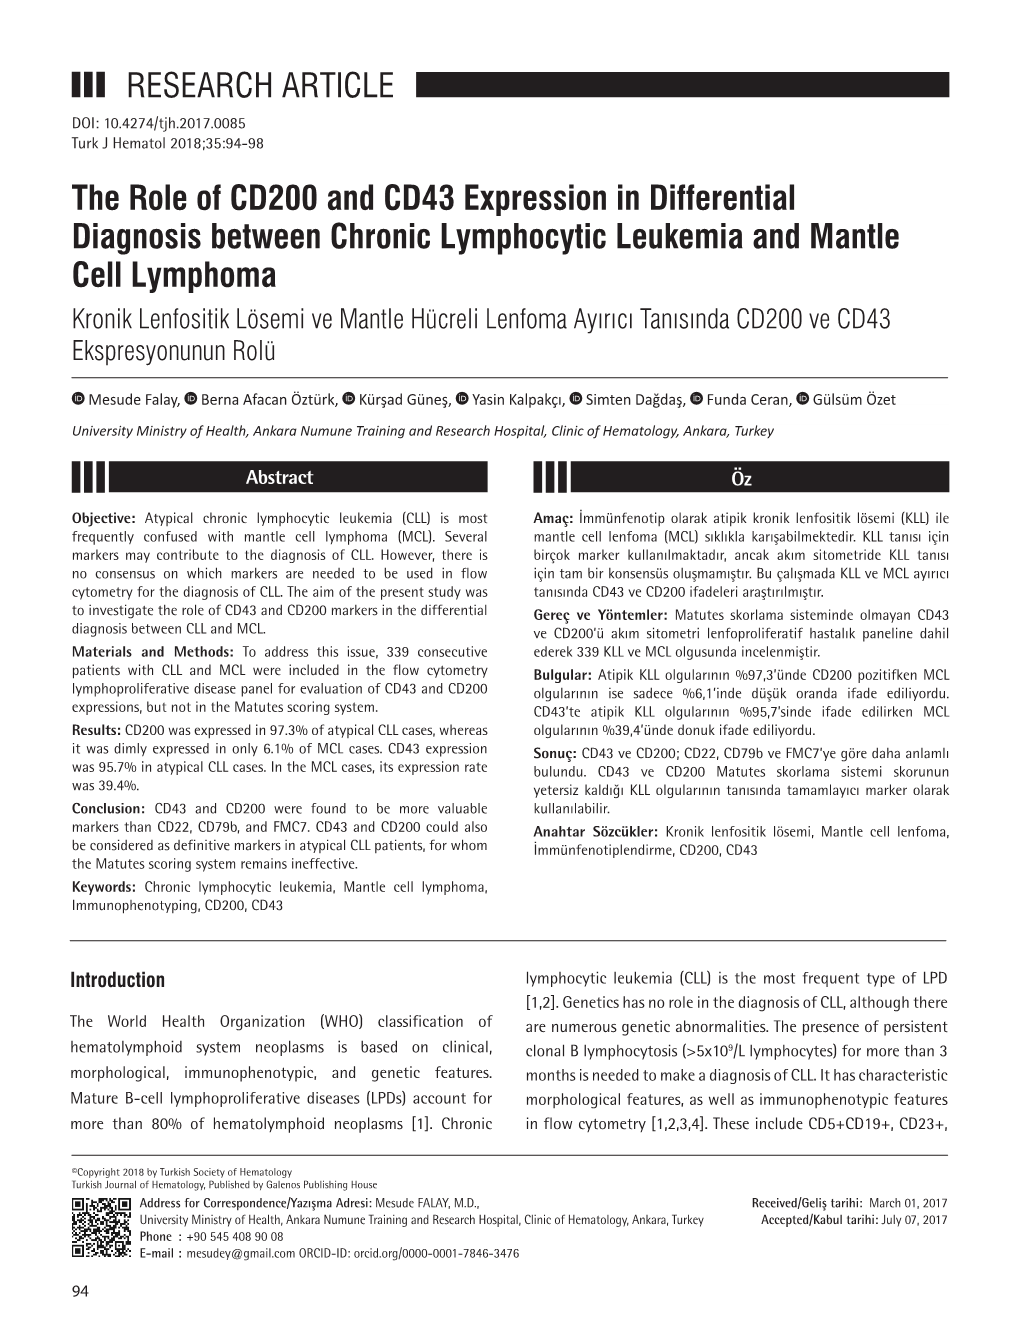 The Role of CD200 and CD43 Expression in Differential Diagnosis